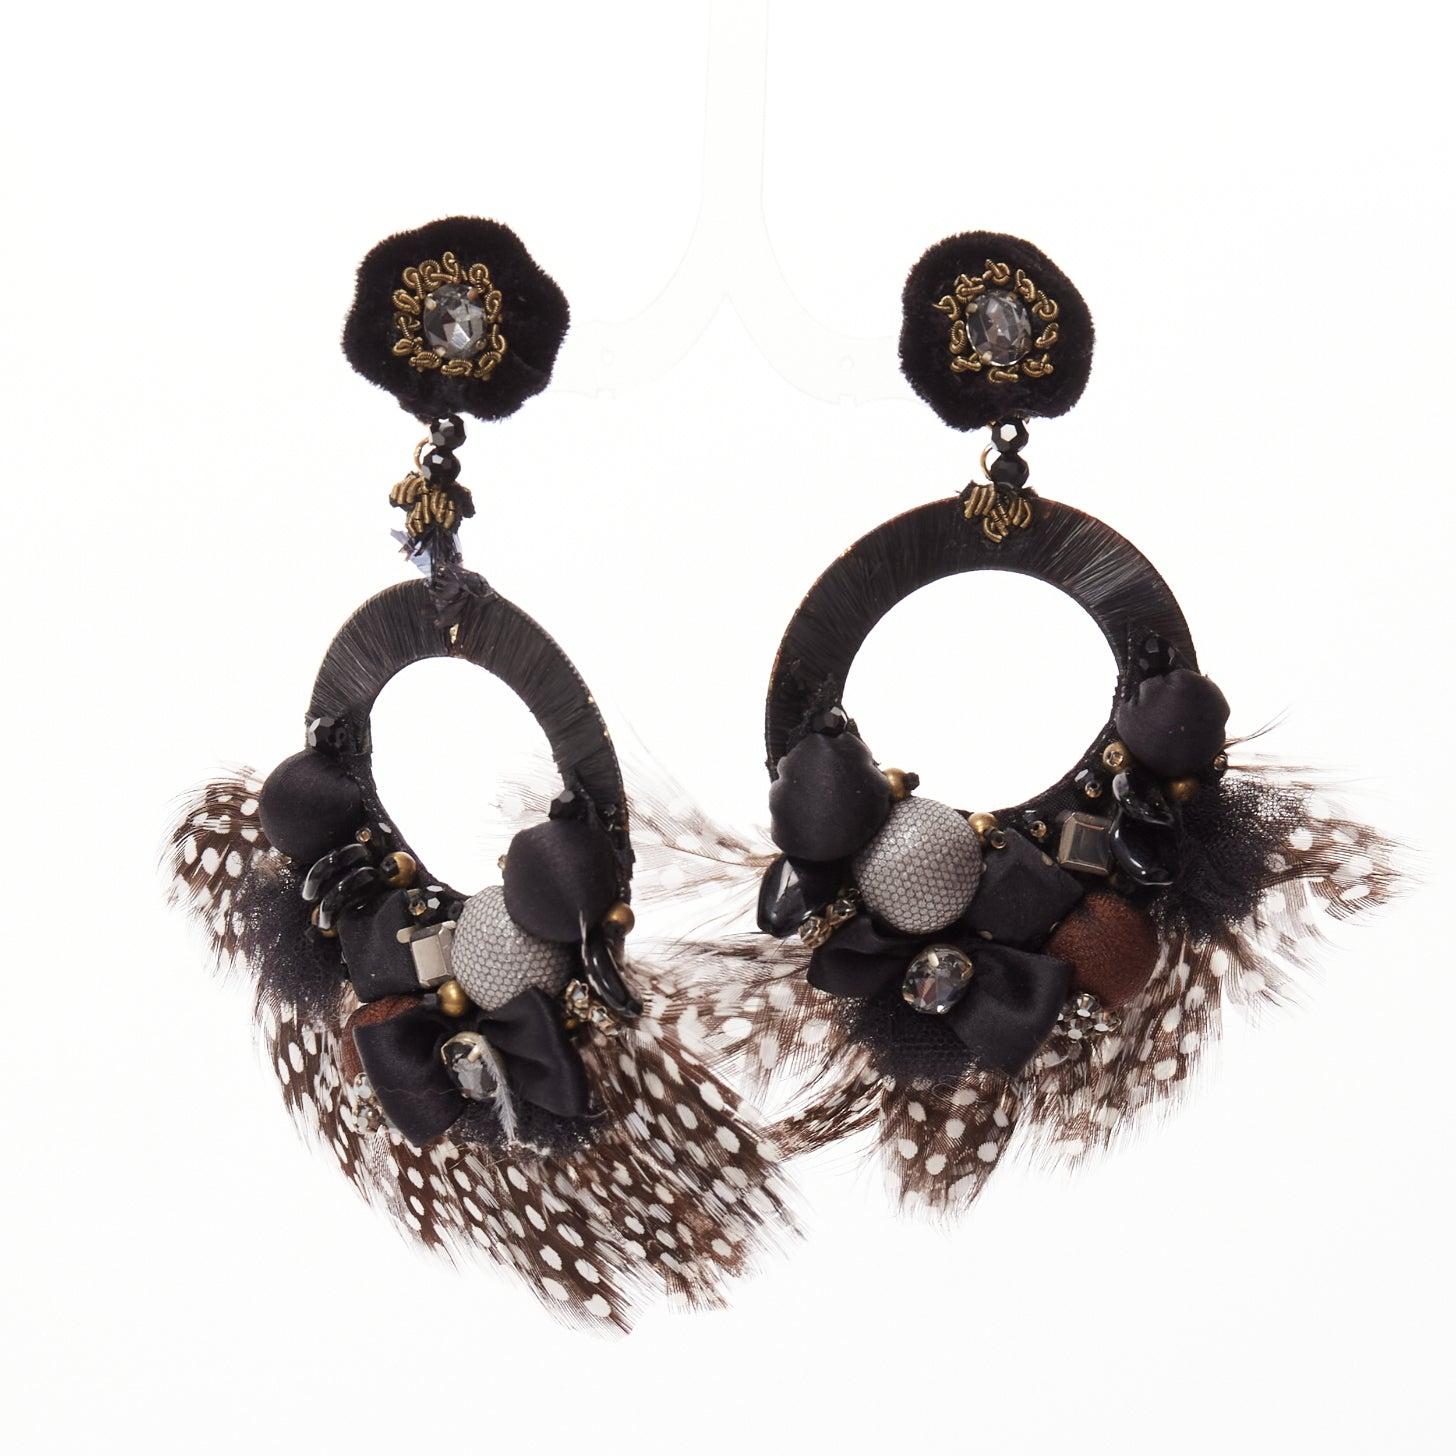 RANJANA KHAN black brown dotted feather beads bow dangling clip on earrings
Reference: AAWC/A01221
Brand: Ranjana Khan
Material: Feather, Raffia
Color: Brown, Black
Pattern: Feather
Closure: Clip On
Lining: Black Leather
Extra Details: Black leather